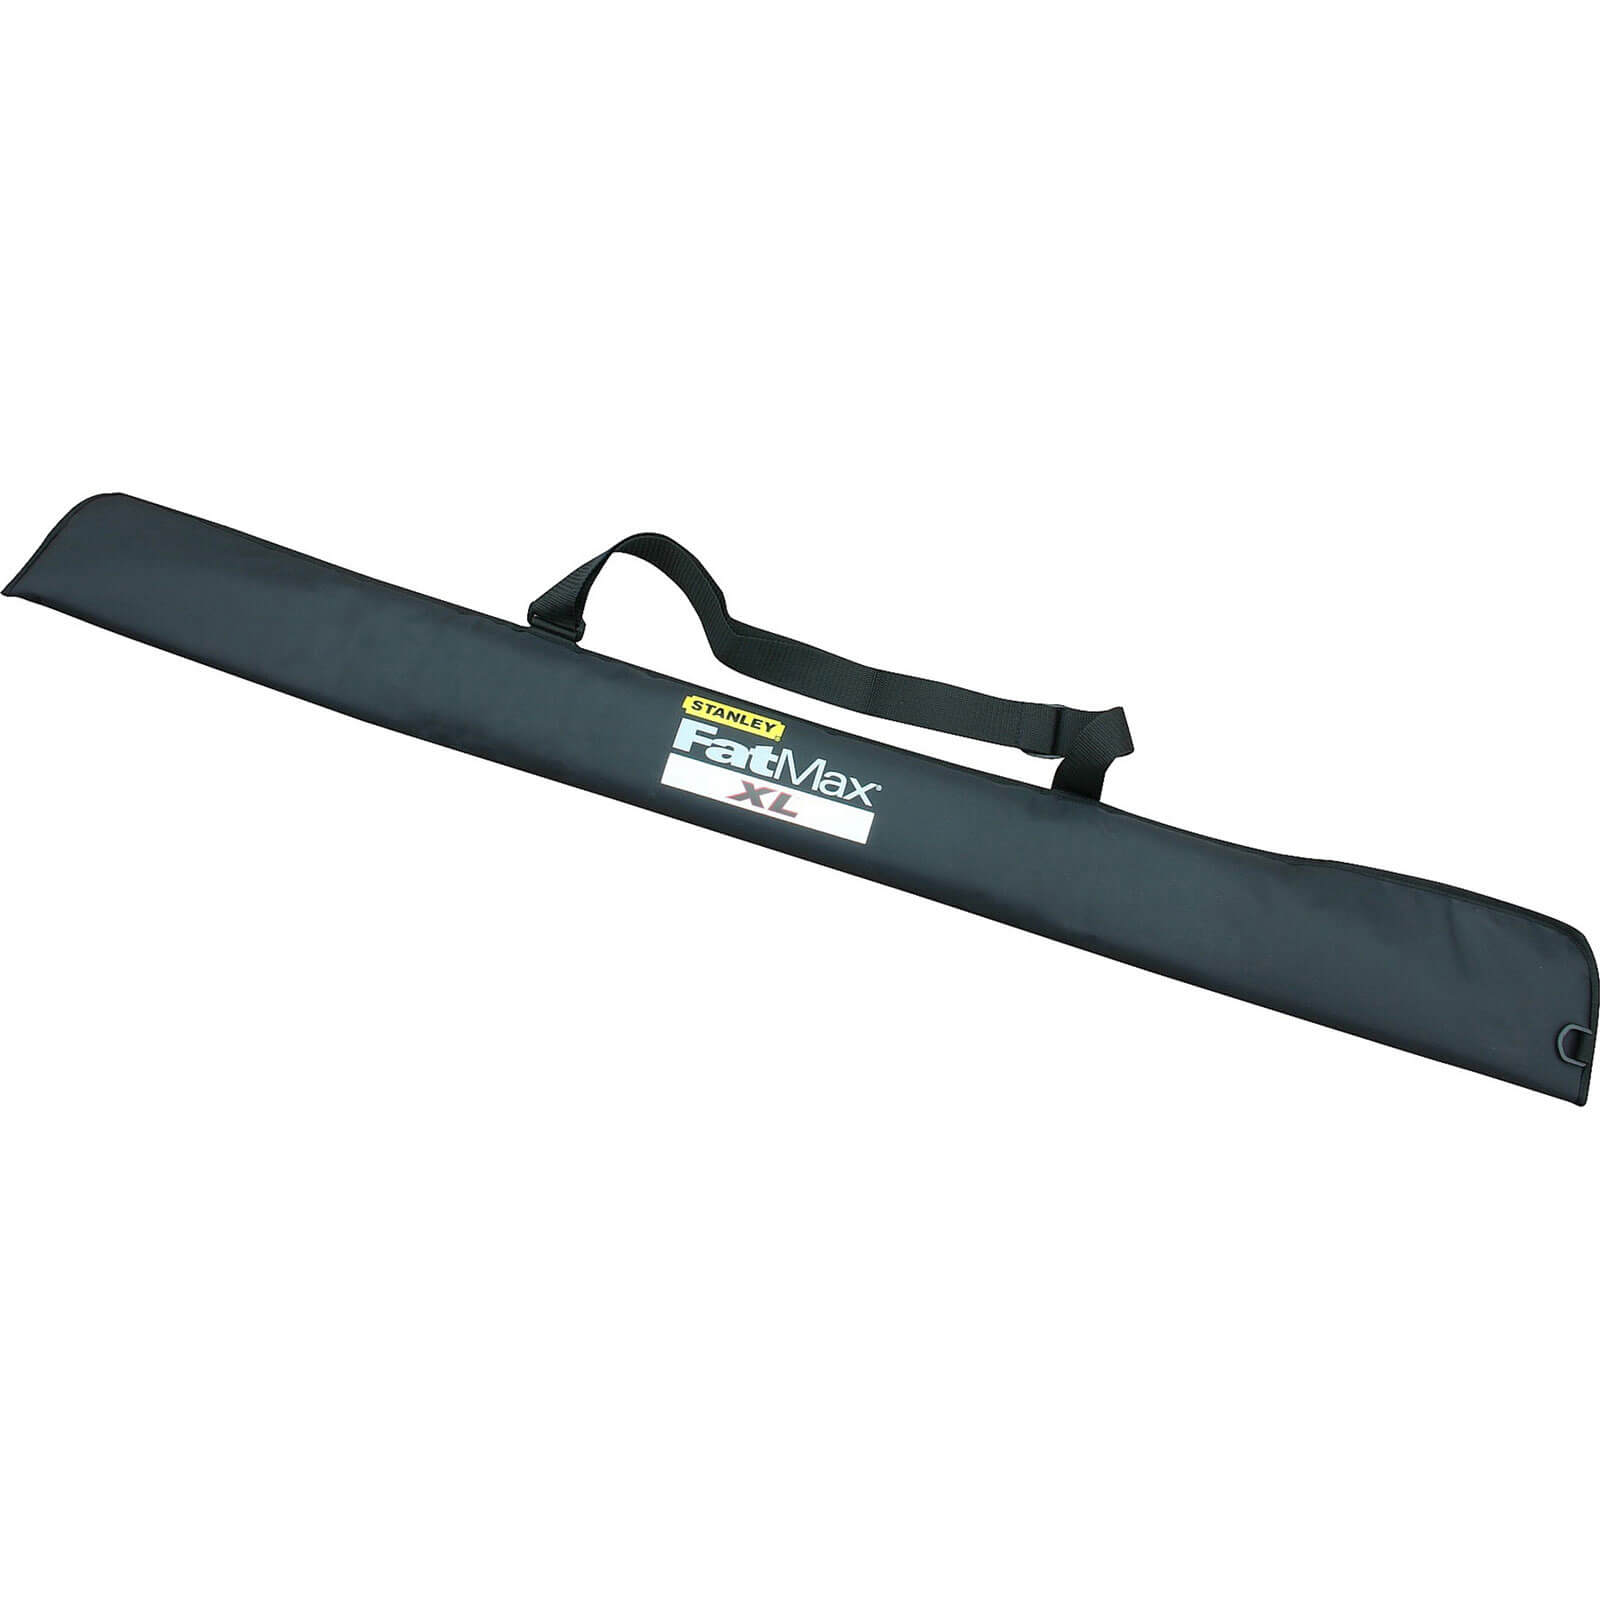 Image of Stanley FatMax Spirit Level Padded Carrying Bag 48" / 120cm